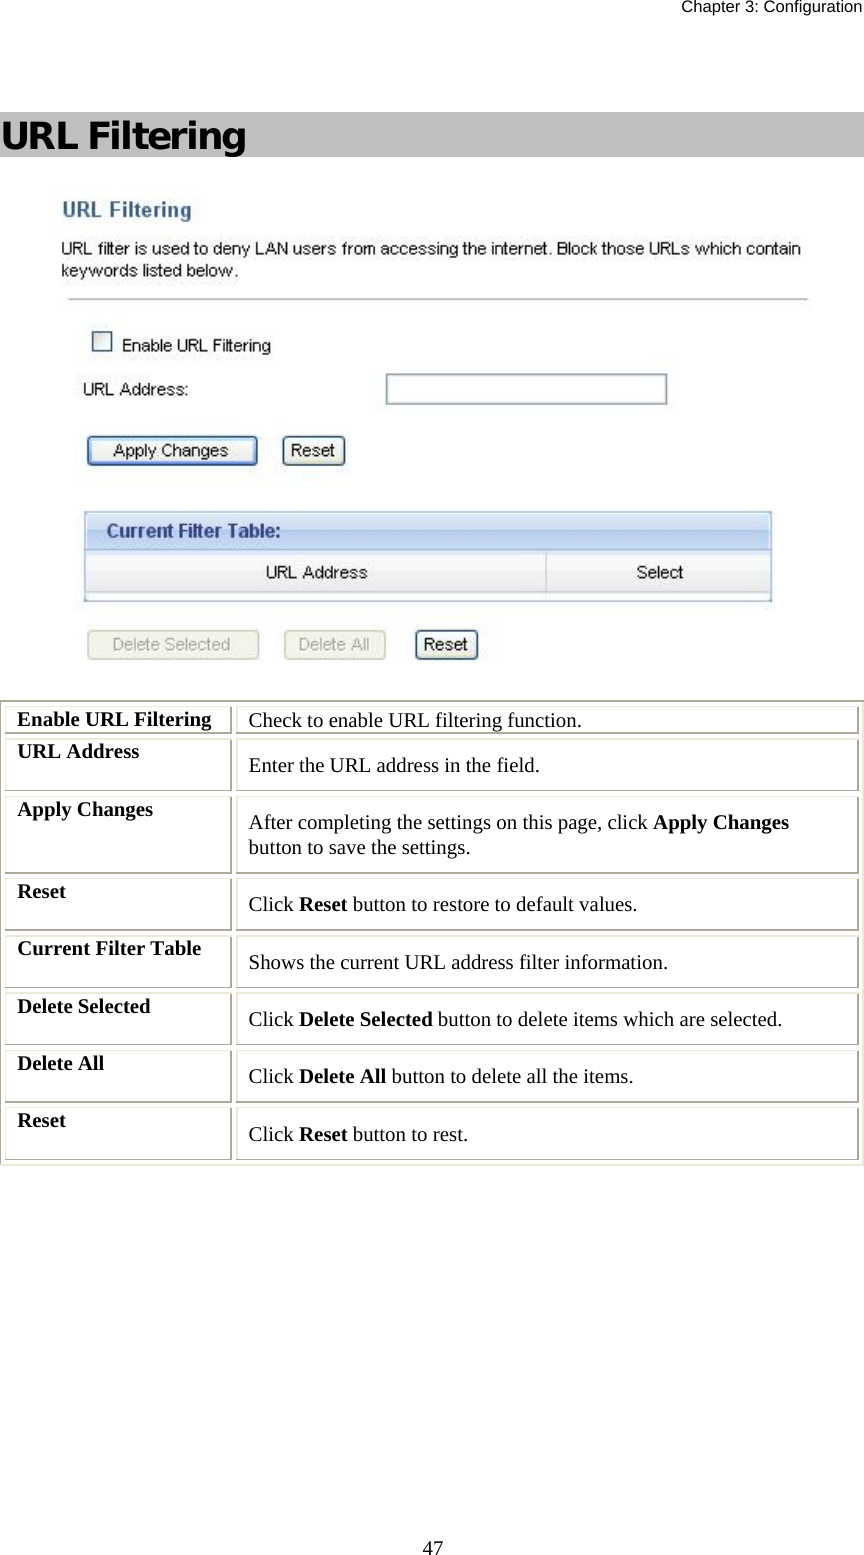   Chapter 3: Configuration  47 URL Filtering  Enable URL Filtering  Check to enable URL filtering function. URL Address  Enter the URL address in the field.   Apply Changes  After completing the settings on this page, click Apply Changes button to save the settings. Reset  Click Reset button to restore to default values. Current Filter Table  Shows the current URL address filter information. Delete Selected  Click Delete Selected button to delete items which are selected. Delete All  Click Delete All button to delete all the items. Reset  Click Reset button to rest.  